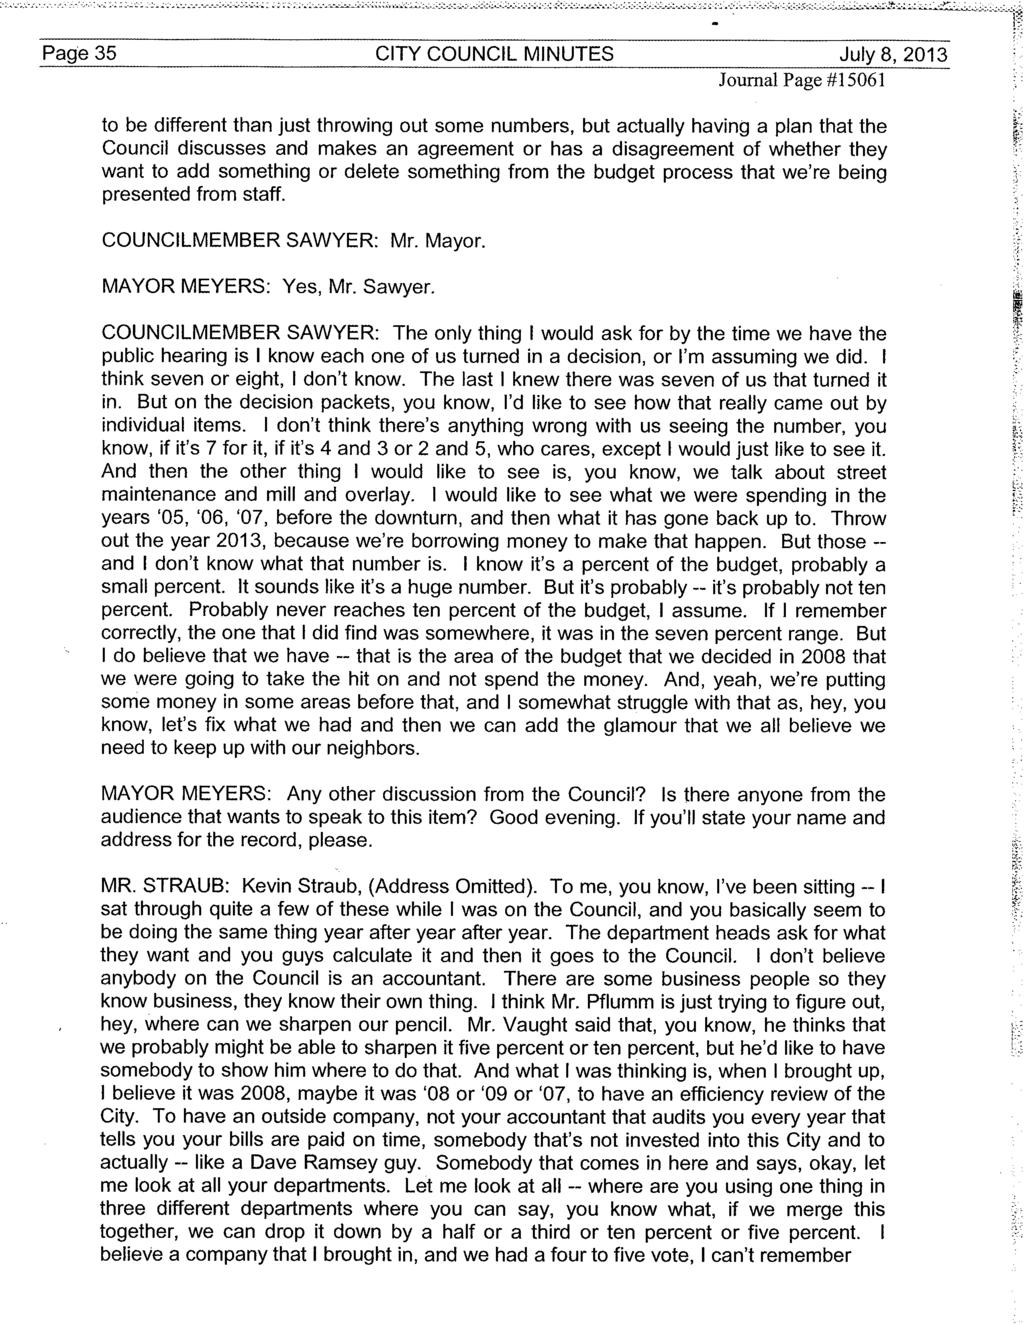 it s Page 35 CITY COUNCIL MINUTES July 8, 2013 Journal Page #15061 to be different than just throwing out some numbers, but actually having a plan that the Council discusses and makes an agreement or